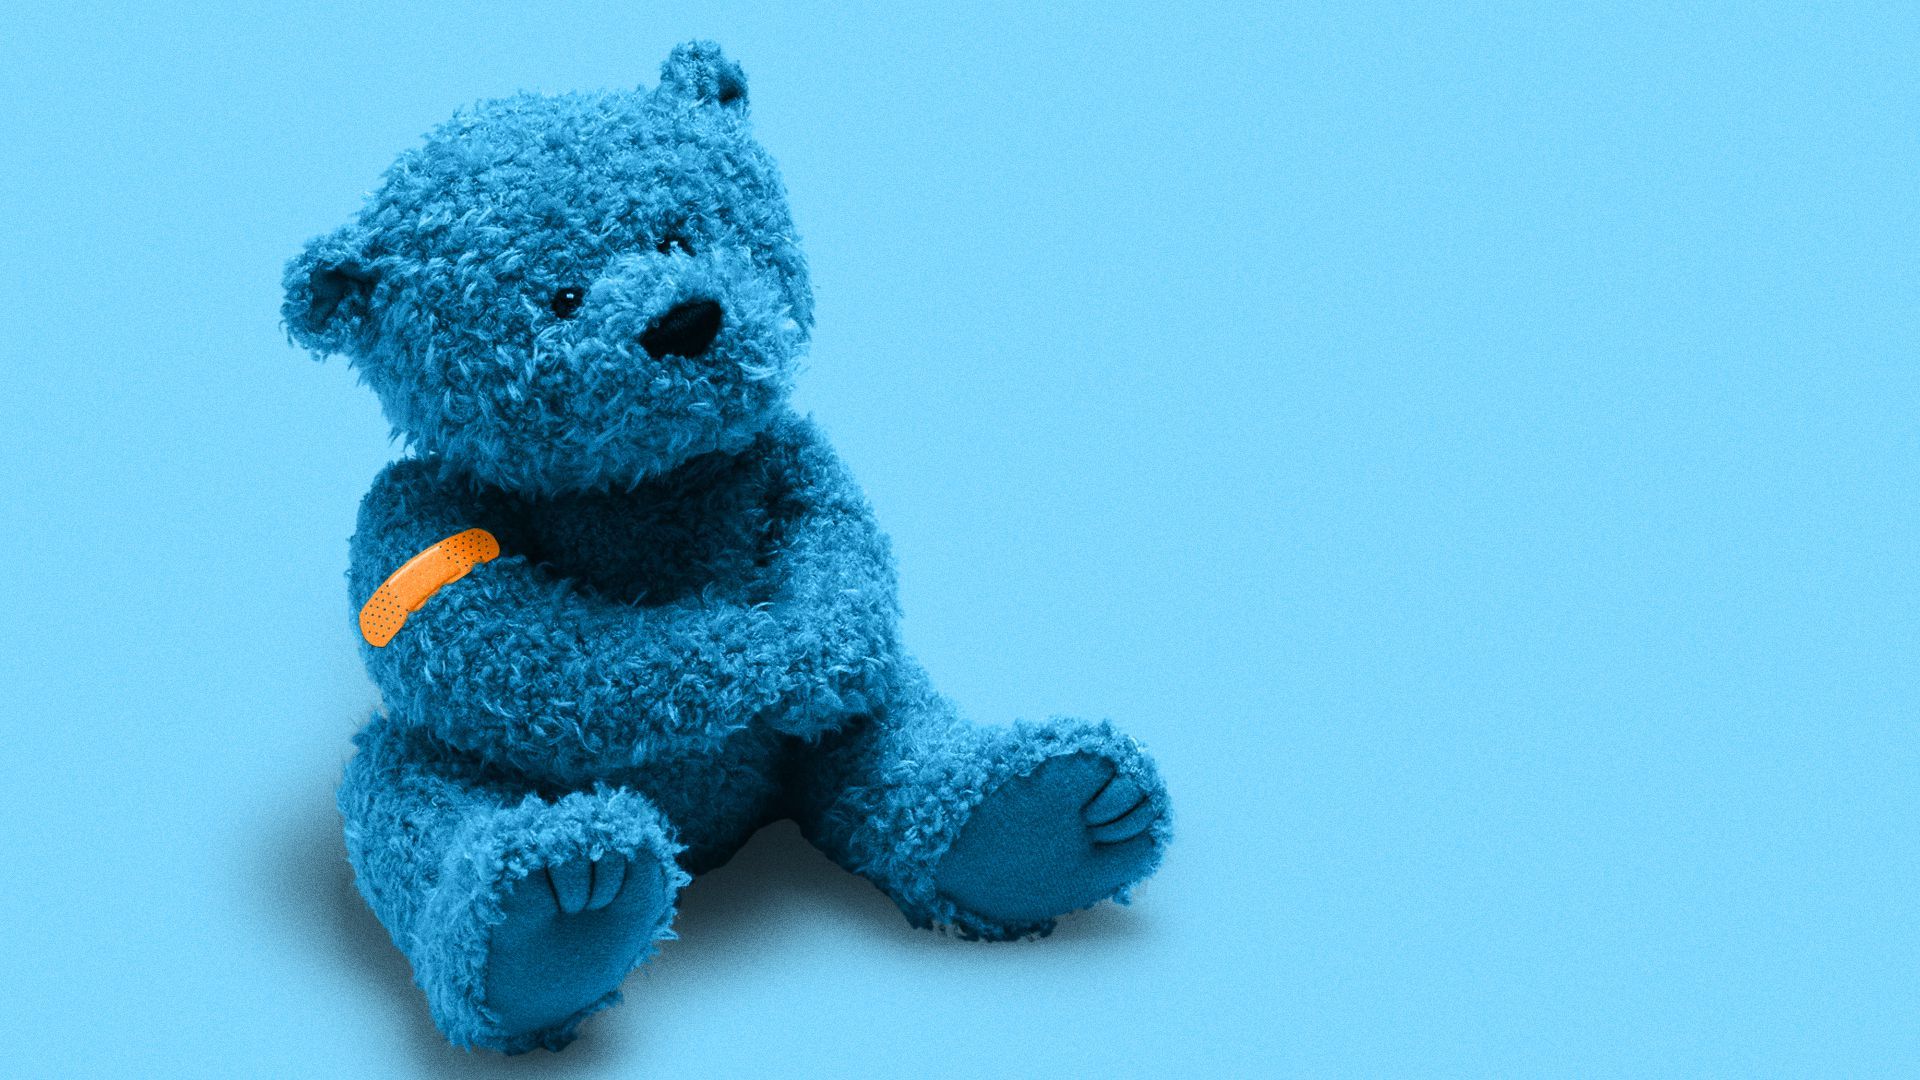 Illustration of a blue teddy bear with orange band-aid on its arm. 